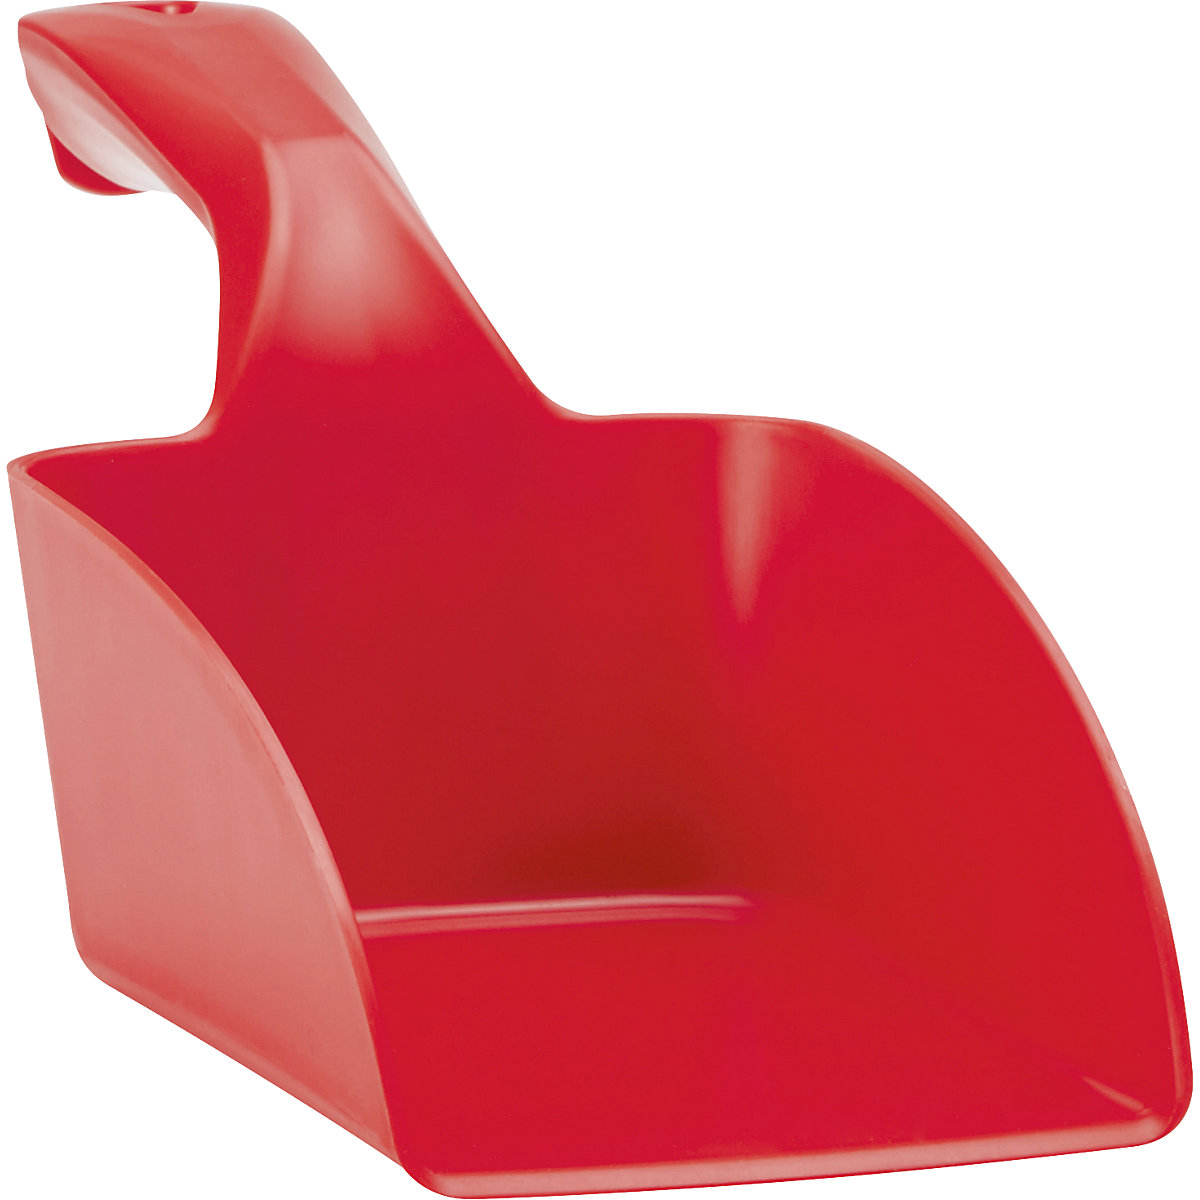 Hand shovel, suitable for foodstuffs – Vikan, capacity 1 l, pack of 12, red